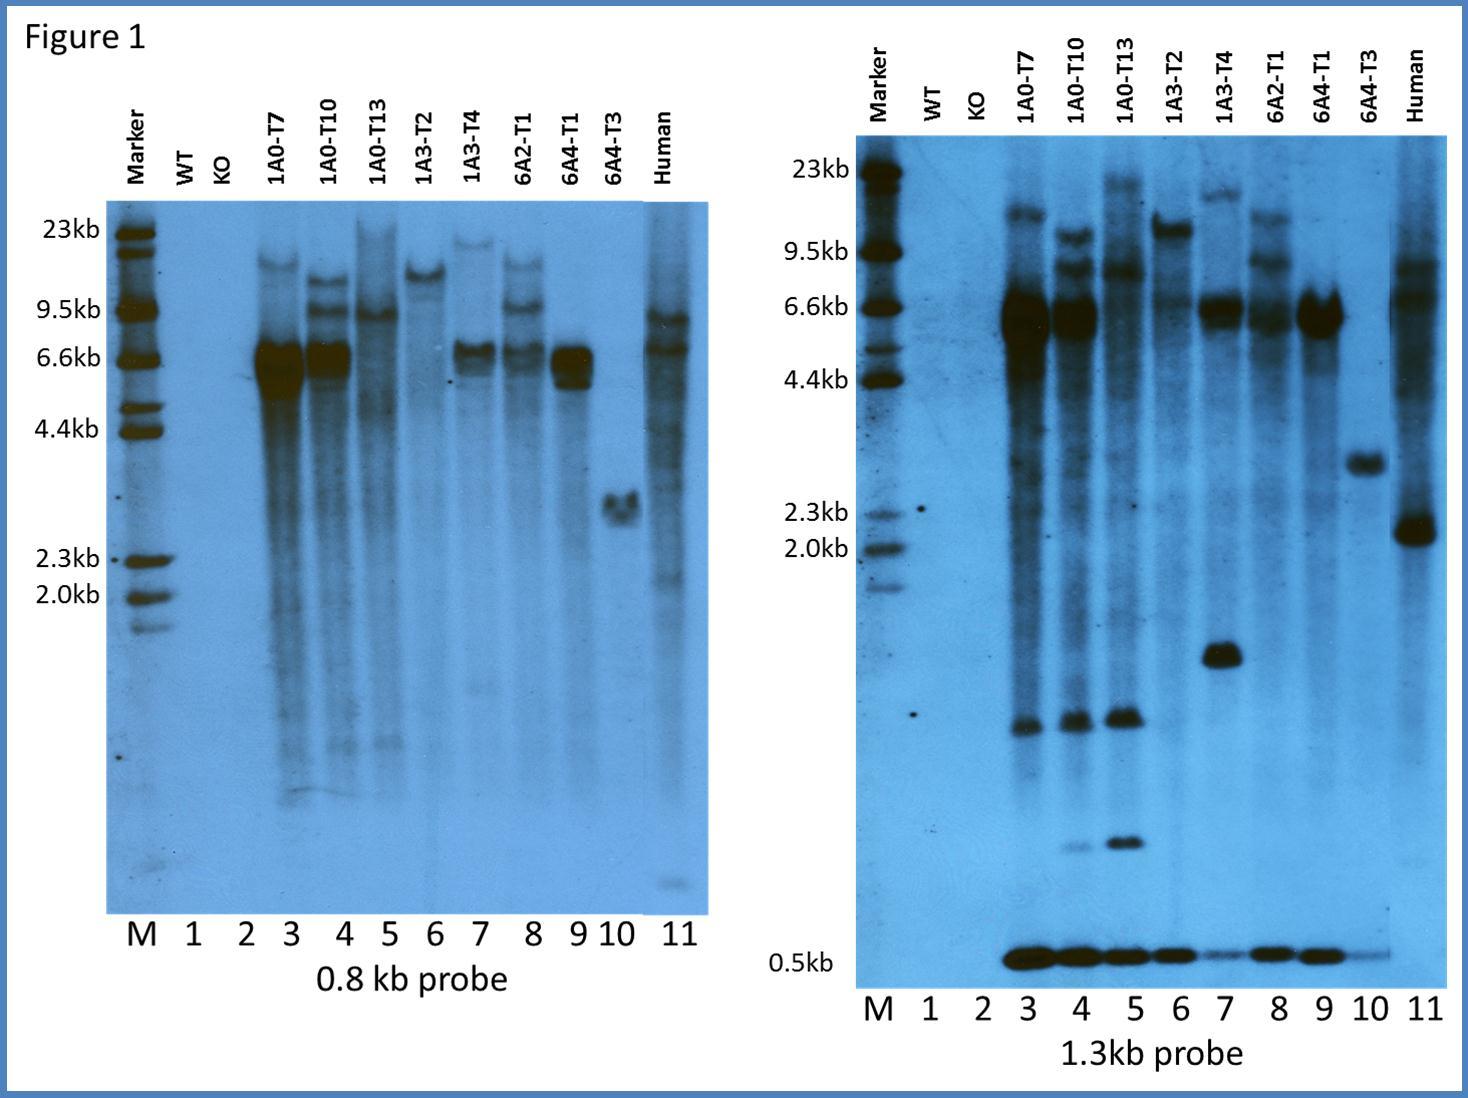  Southern Blot analysis of transgene integration in hSP-A1 and hSP-A2 TG mice. Genomic DNA was prepared from hSP-A TG, SP-A KO, and WT mice, as well as from human lung tissue. DNA samples were digested with EcoRI and subjected to agarose gel electrophoresis followed by Southern blot analysis. The hSP-A genes were detected with DIG-labeled DNA probes with sizes of 0.8kb (left panel) and 1.3kb (right panel), as described in Materials and Methods. The sequences of the probes are listed in Supplementary Table 1. The 0.8kb probe is located within the SP-A coding region (exons I-IV) and the corresponding sequence in the transgene does not contain an EcoRI restriction site. The 1.3kb probe contains the SP-A coding region (exons I-IV) plus a partial 3’UTR sequence, and the corresponding sequence in the transgene contains one EcoRI restriction site, that results in an additional 0.5kb band that is detected with this probe (lanes 3-10). DNA from both WT and KO was not detected with either probe (negative controls), confirming the absence of the transgene and lack of cross hybridization with non-SP-A sequence. Genomic DNA obtained from human lung tissue was used as a positive control (lane 11).